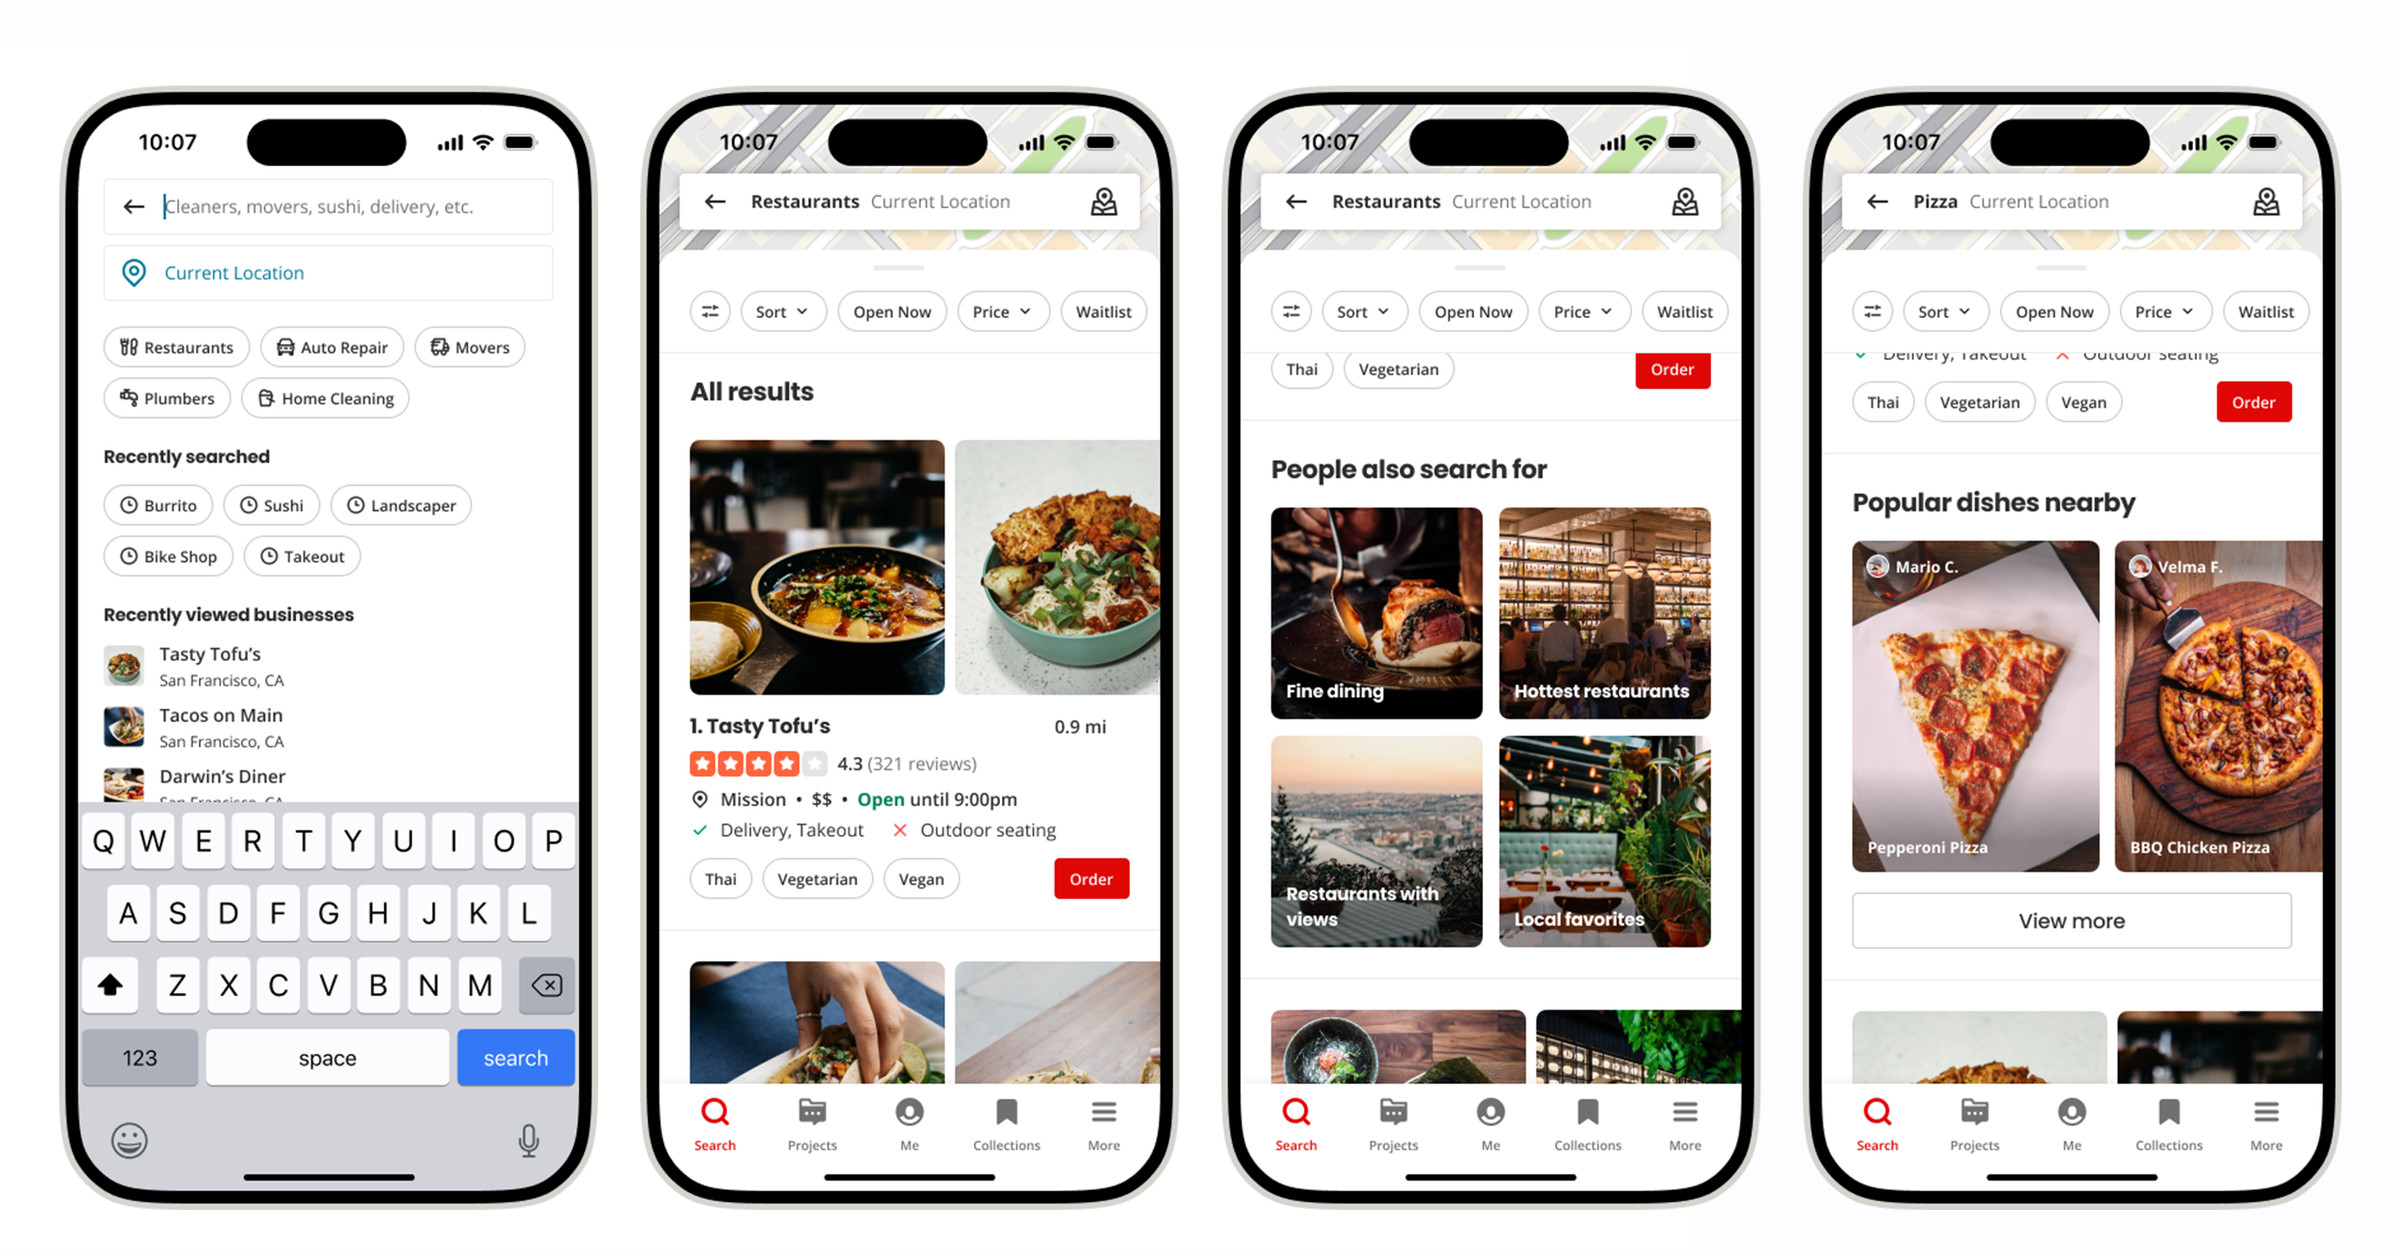 Yelp is bringing more photos to search, too.